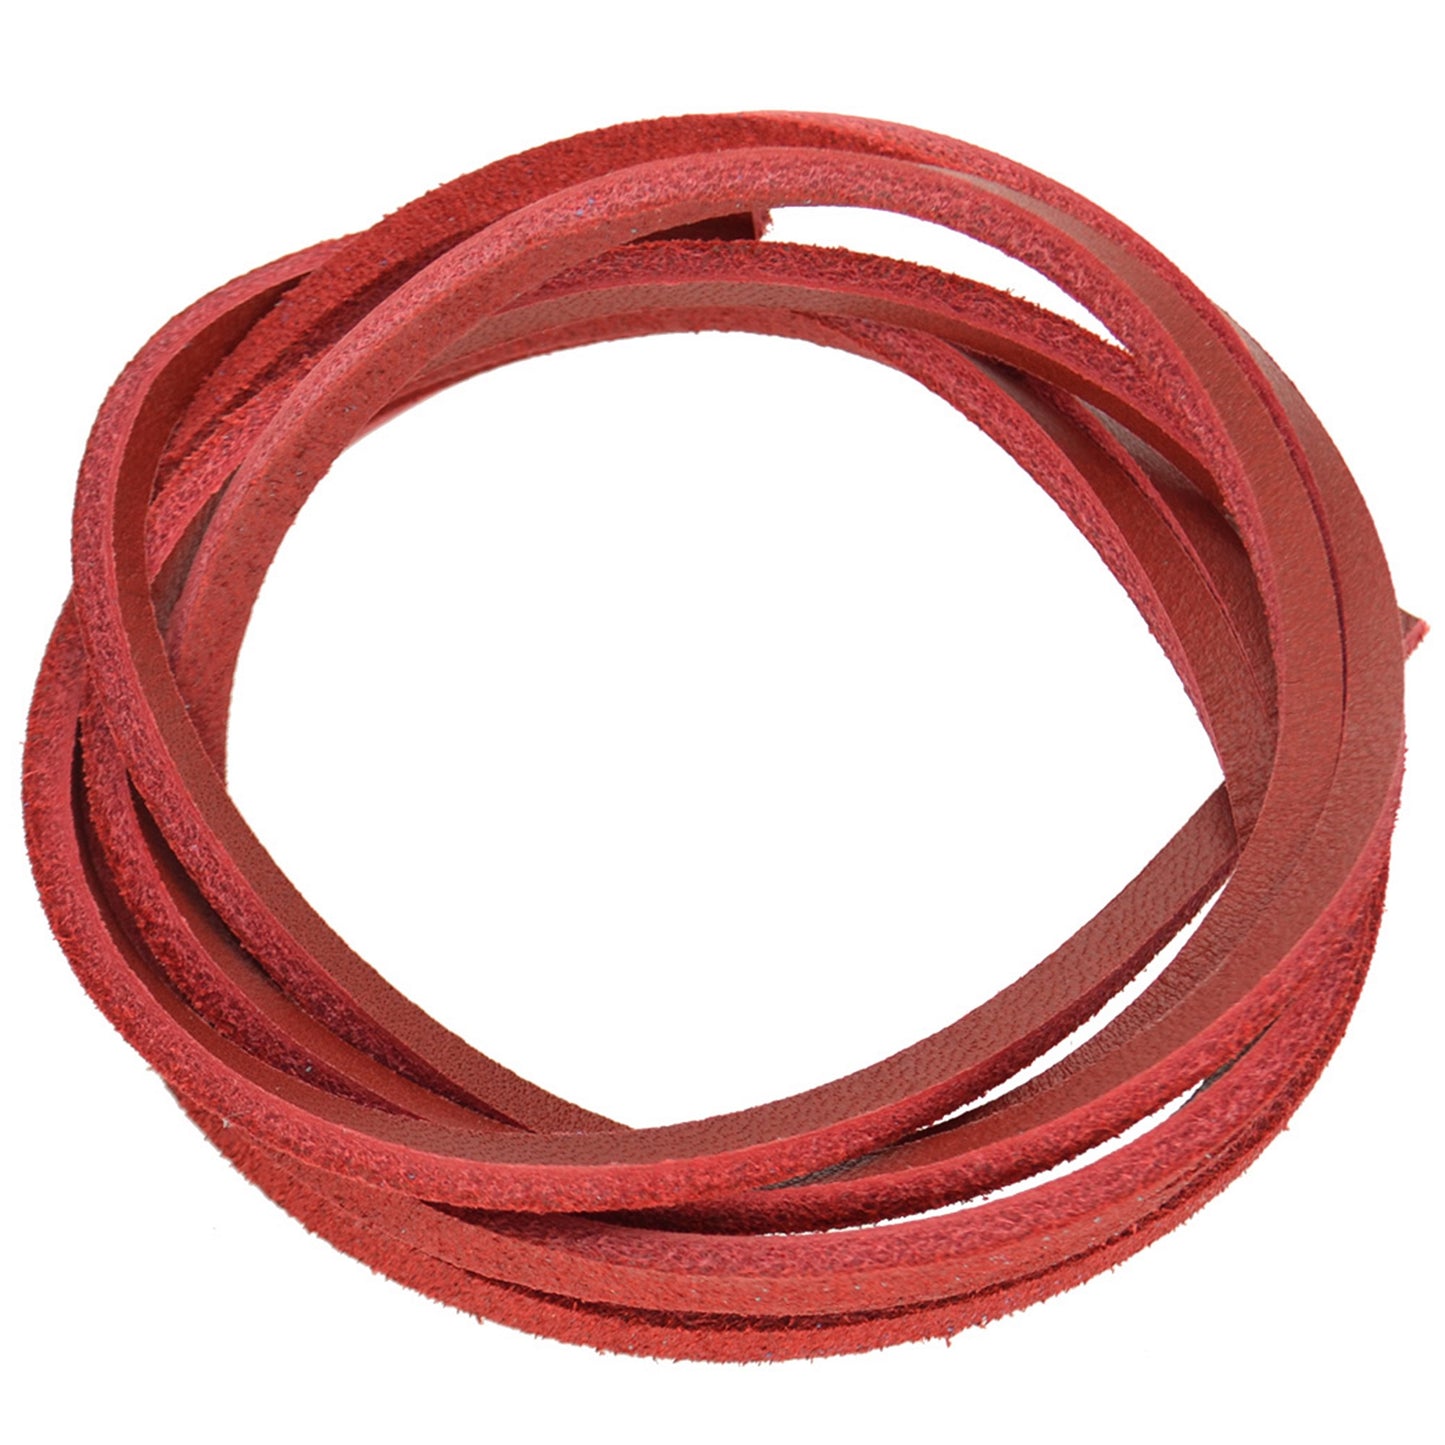 120cm Leather Shoe Laces - Red